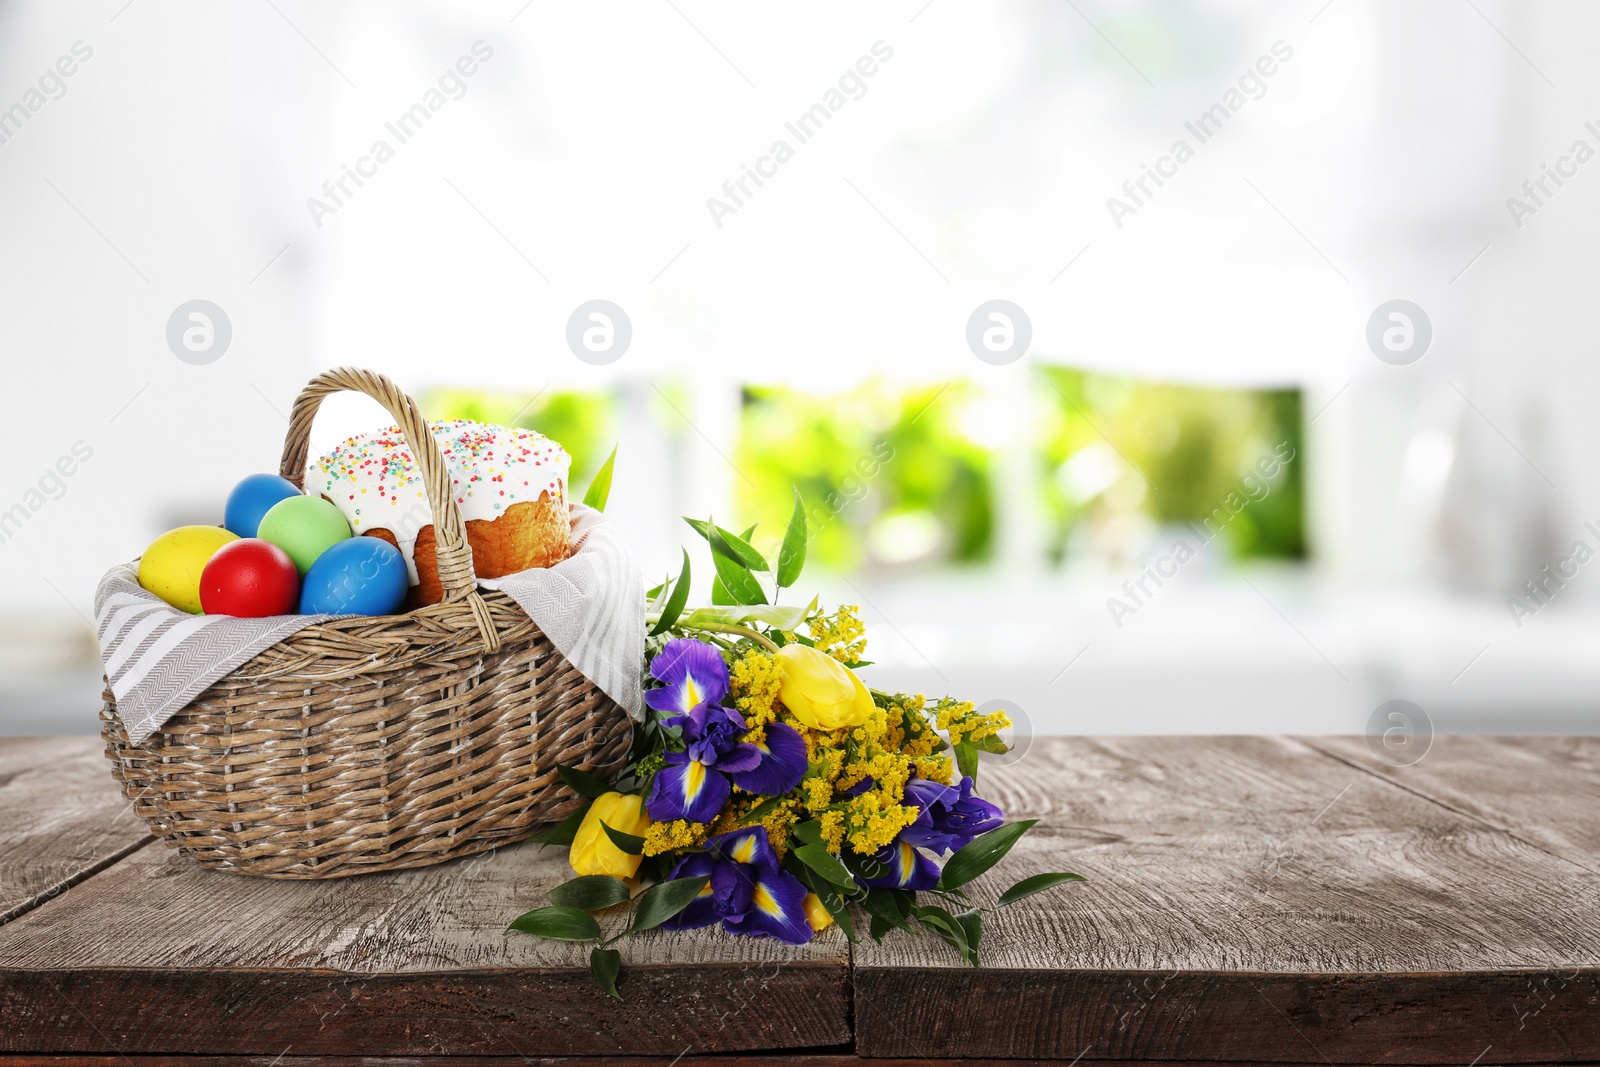 Image of Basket with traditional Easter cake, dyed eggs and flowers on wooden table indoors. Space for text